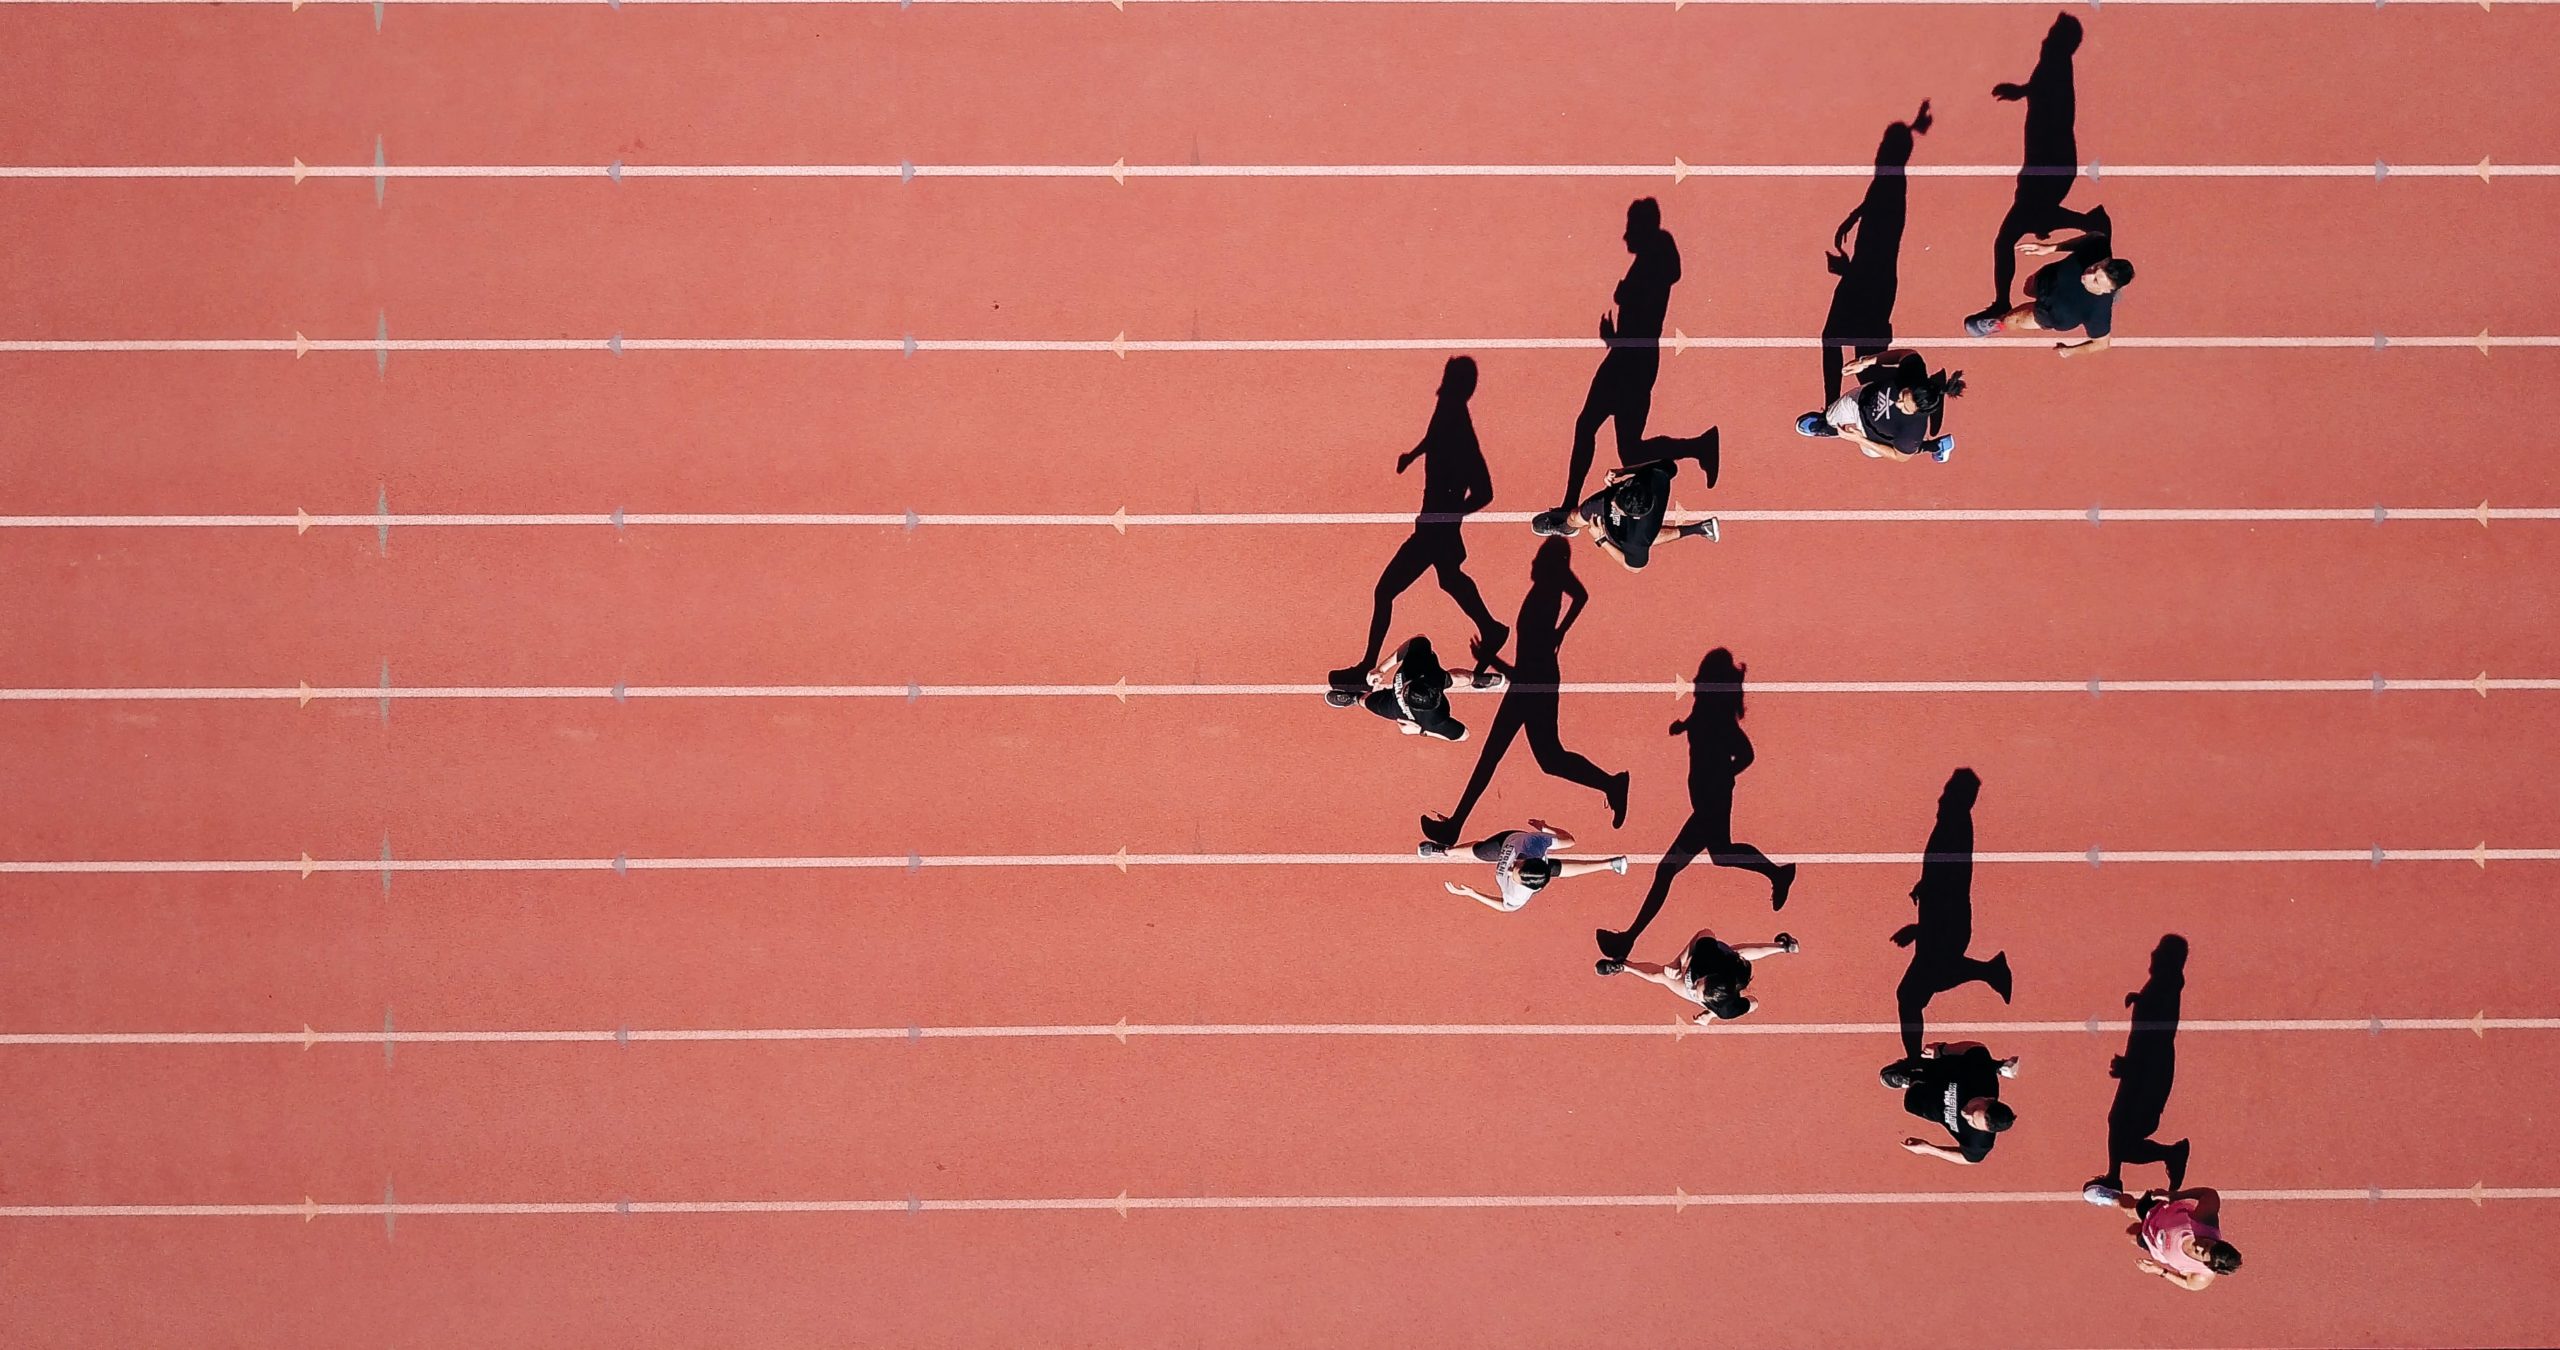 Runners on a race track, with their shadows above them showing their silhouettes